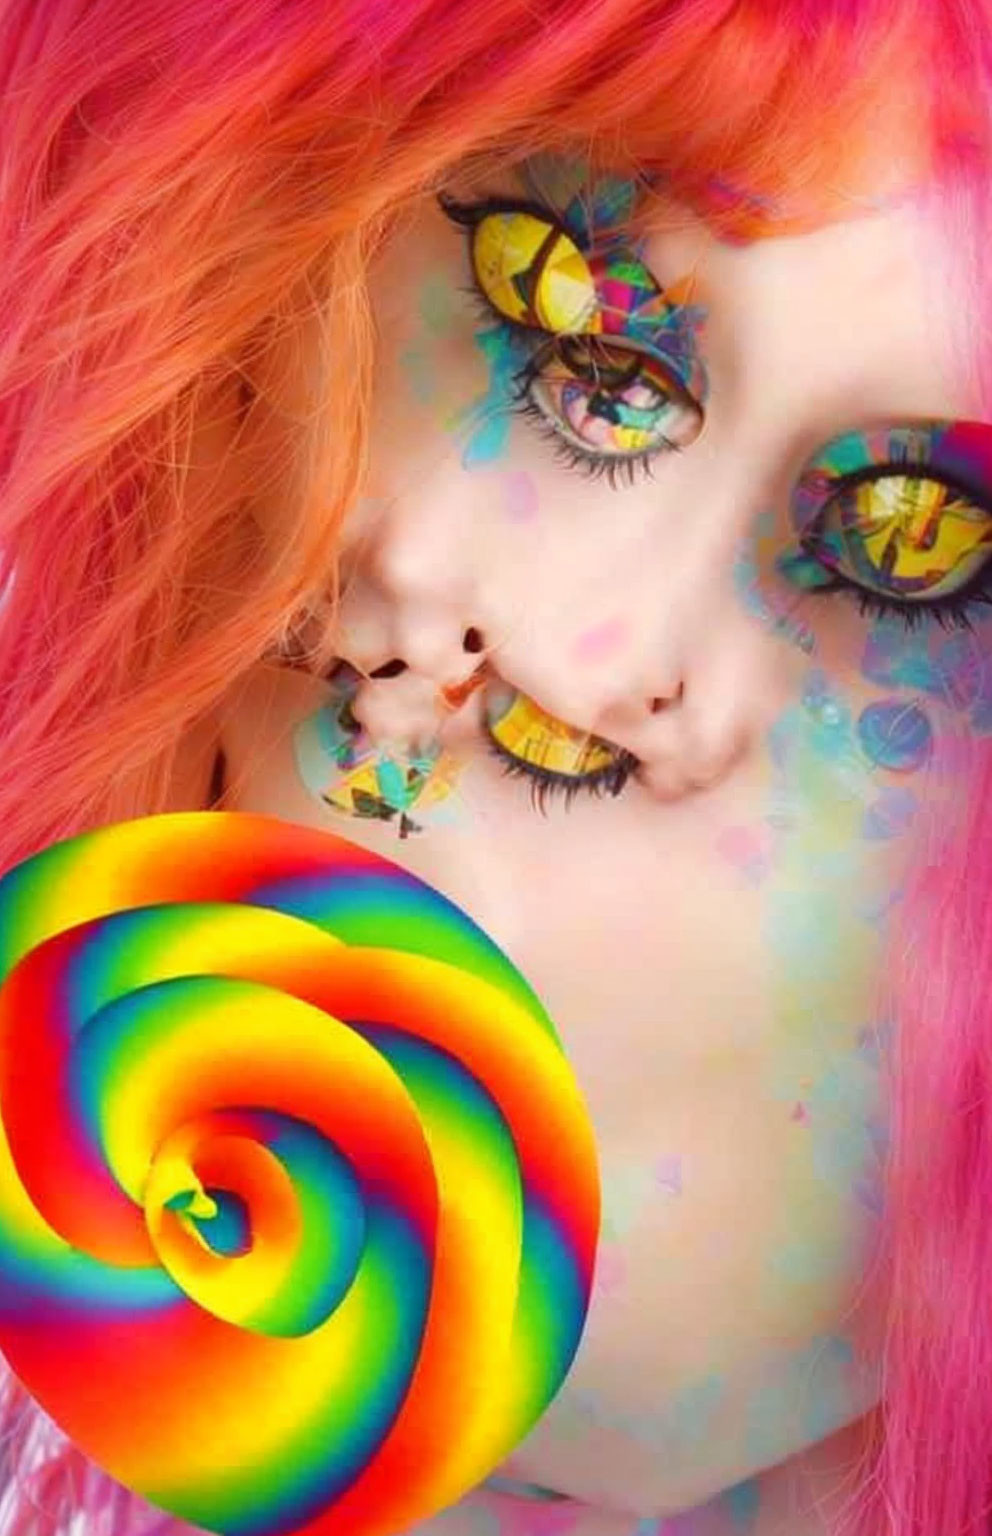 Vibrant rainbow makeup and pink hair with swirled lollipop